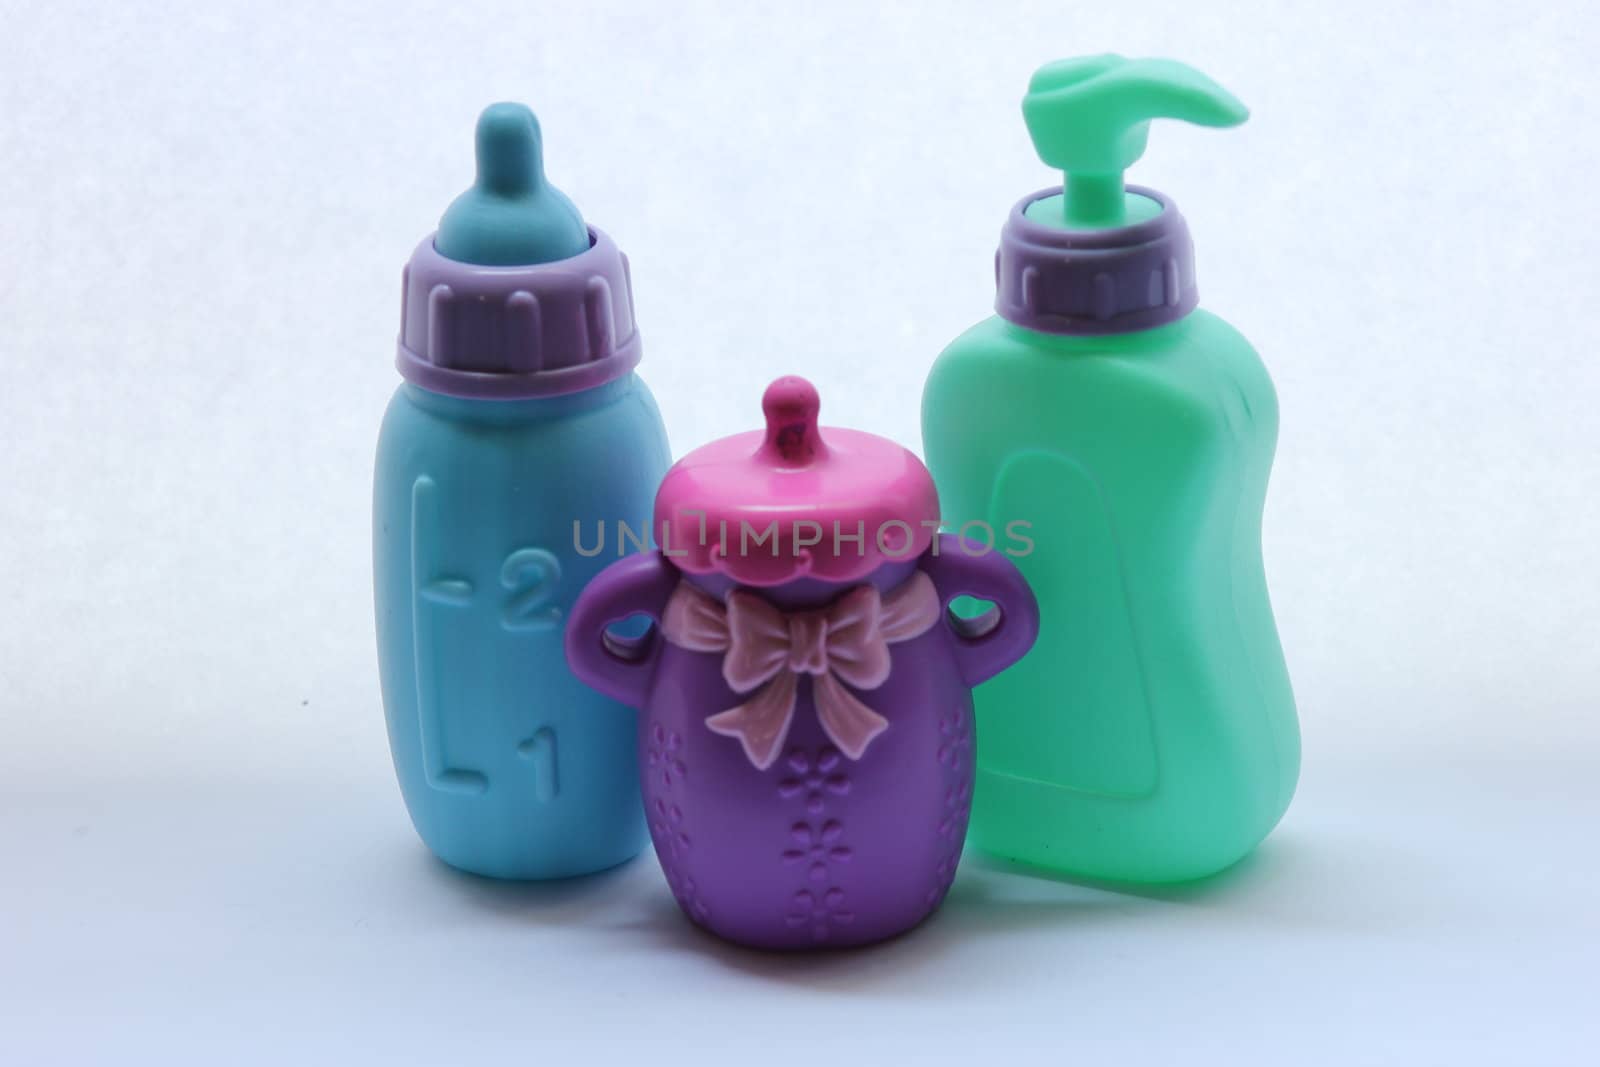 Toddler toys that include two bottles and a soap dispenser.